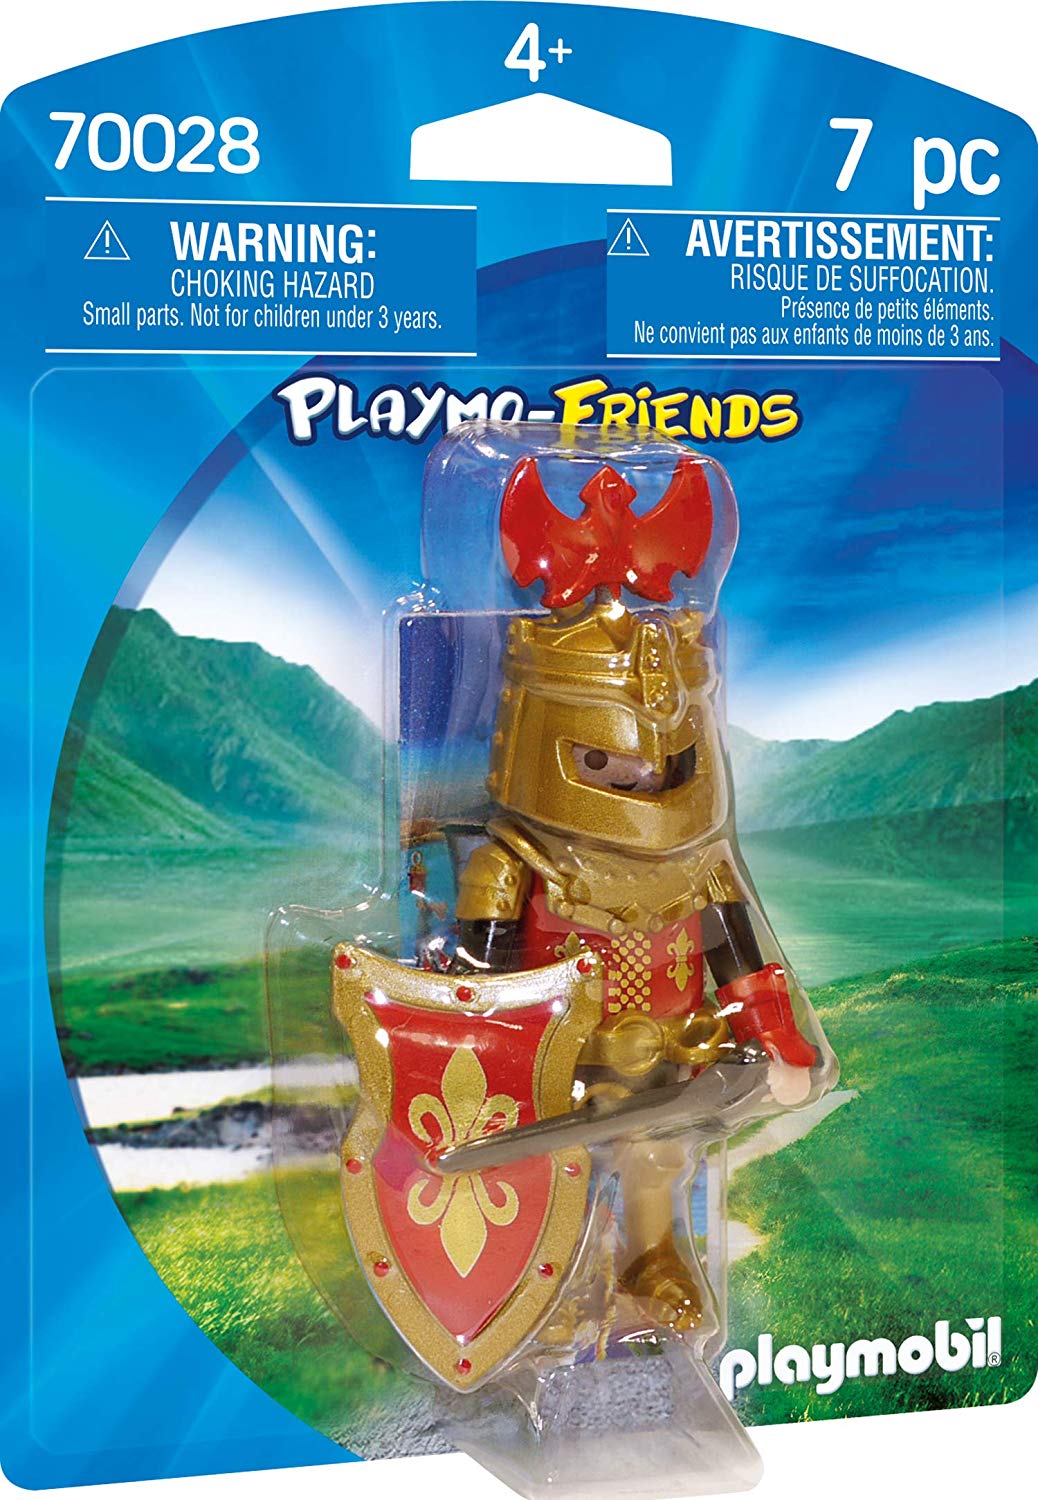 Playmobil 70028 Playmo-Friends Knight Colourful